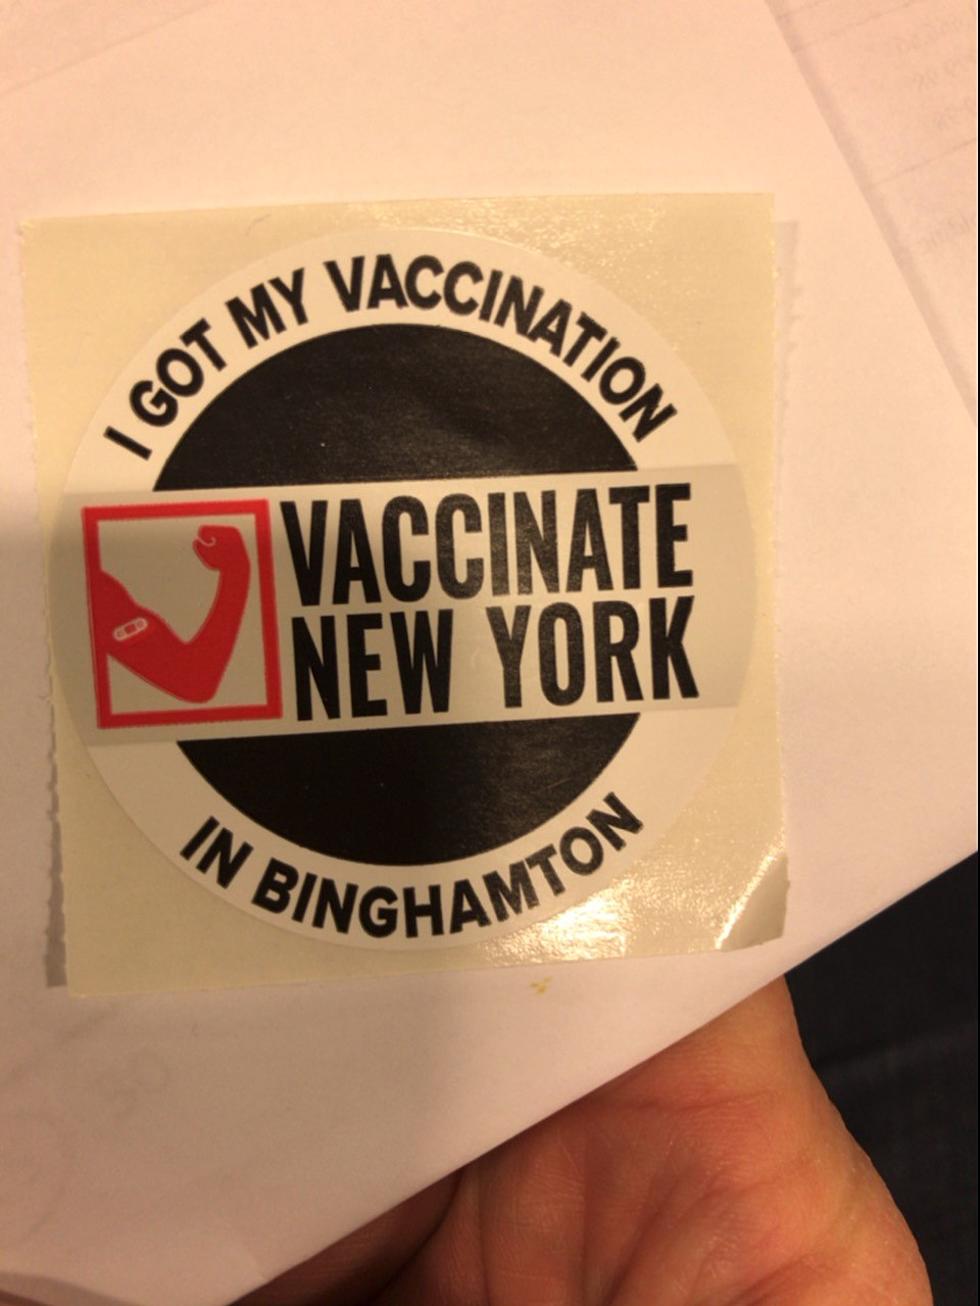 New York Children Age 12+ Cleared to Get COVID-19 Vaccine